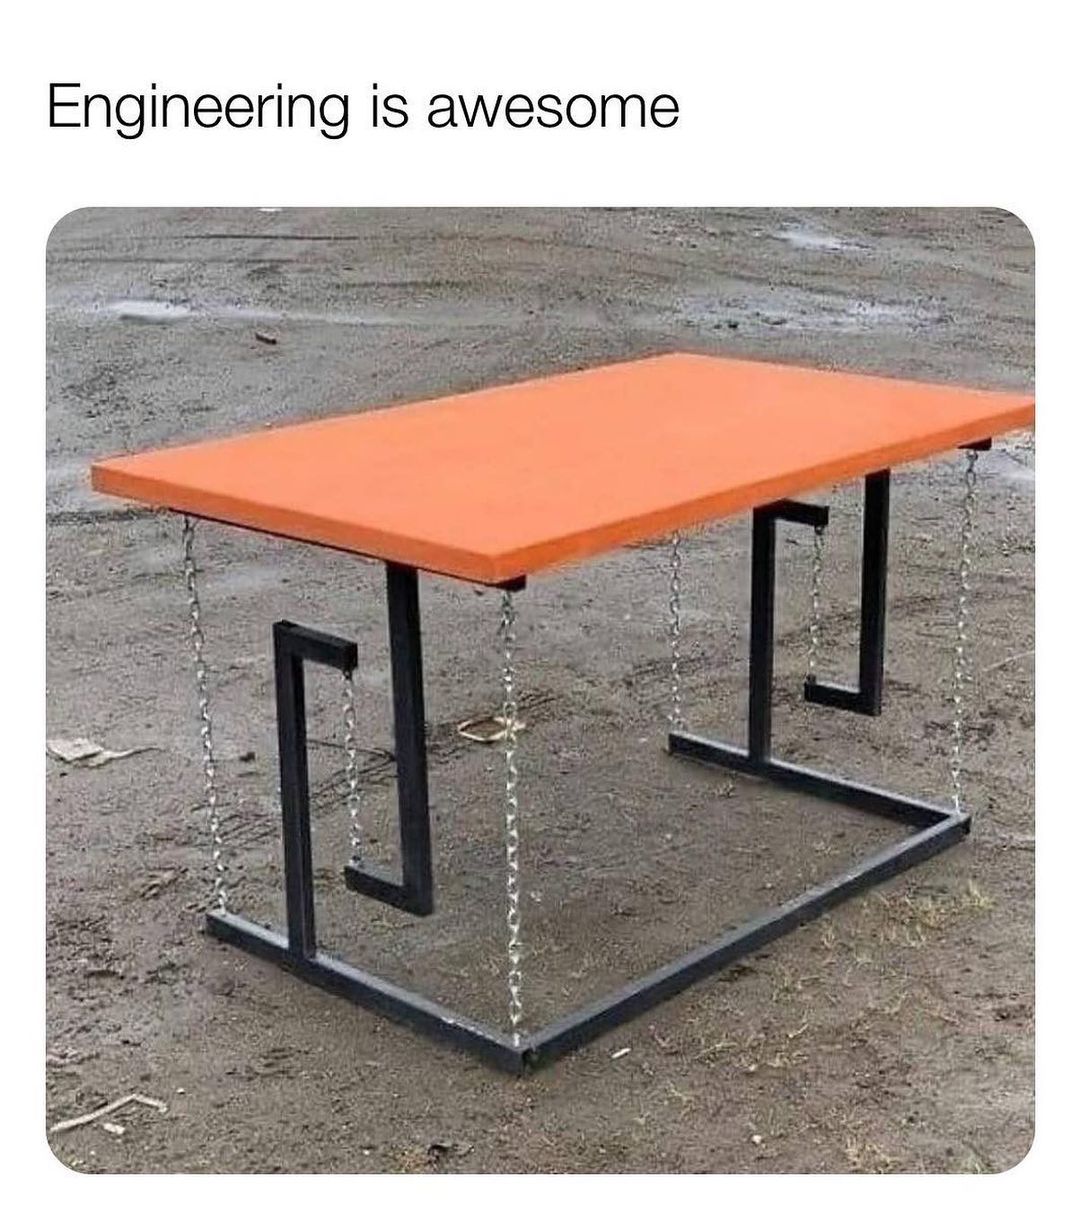 Engineering is awesome.